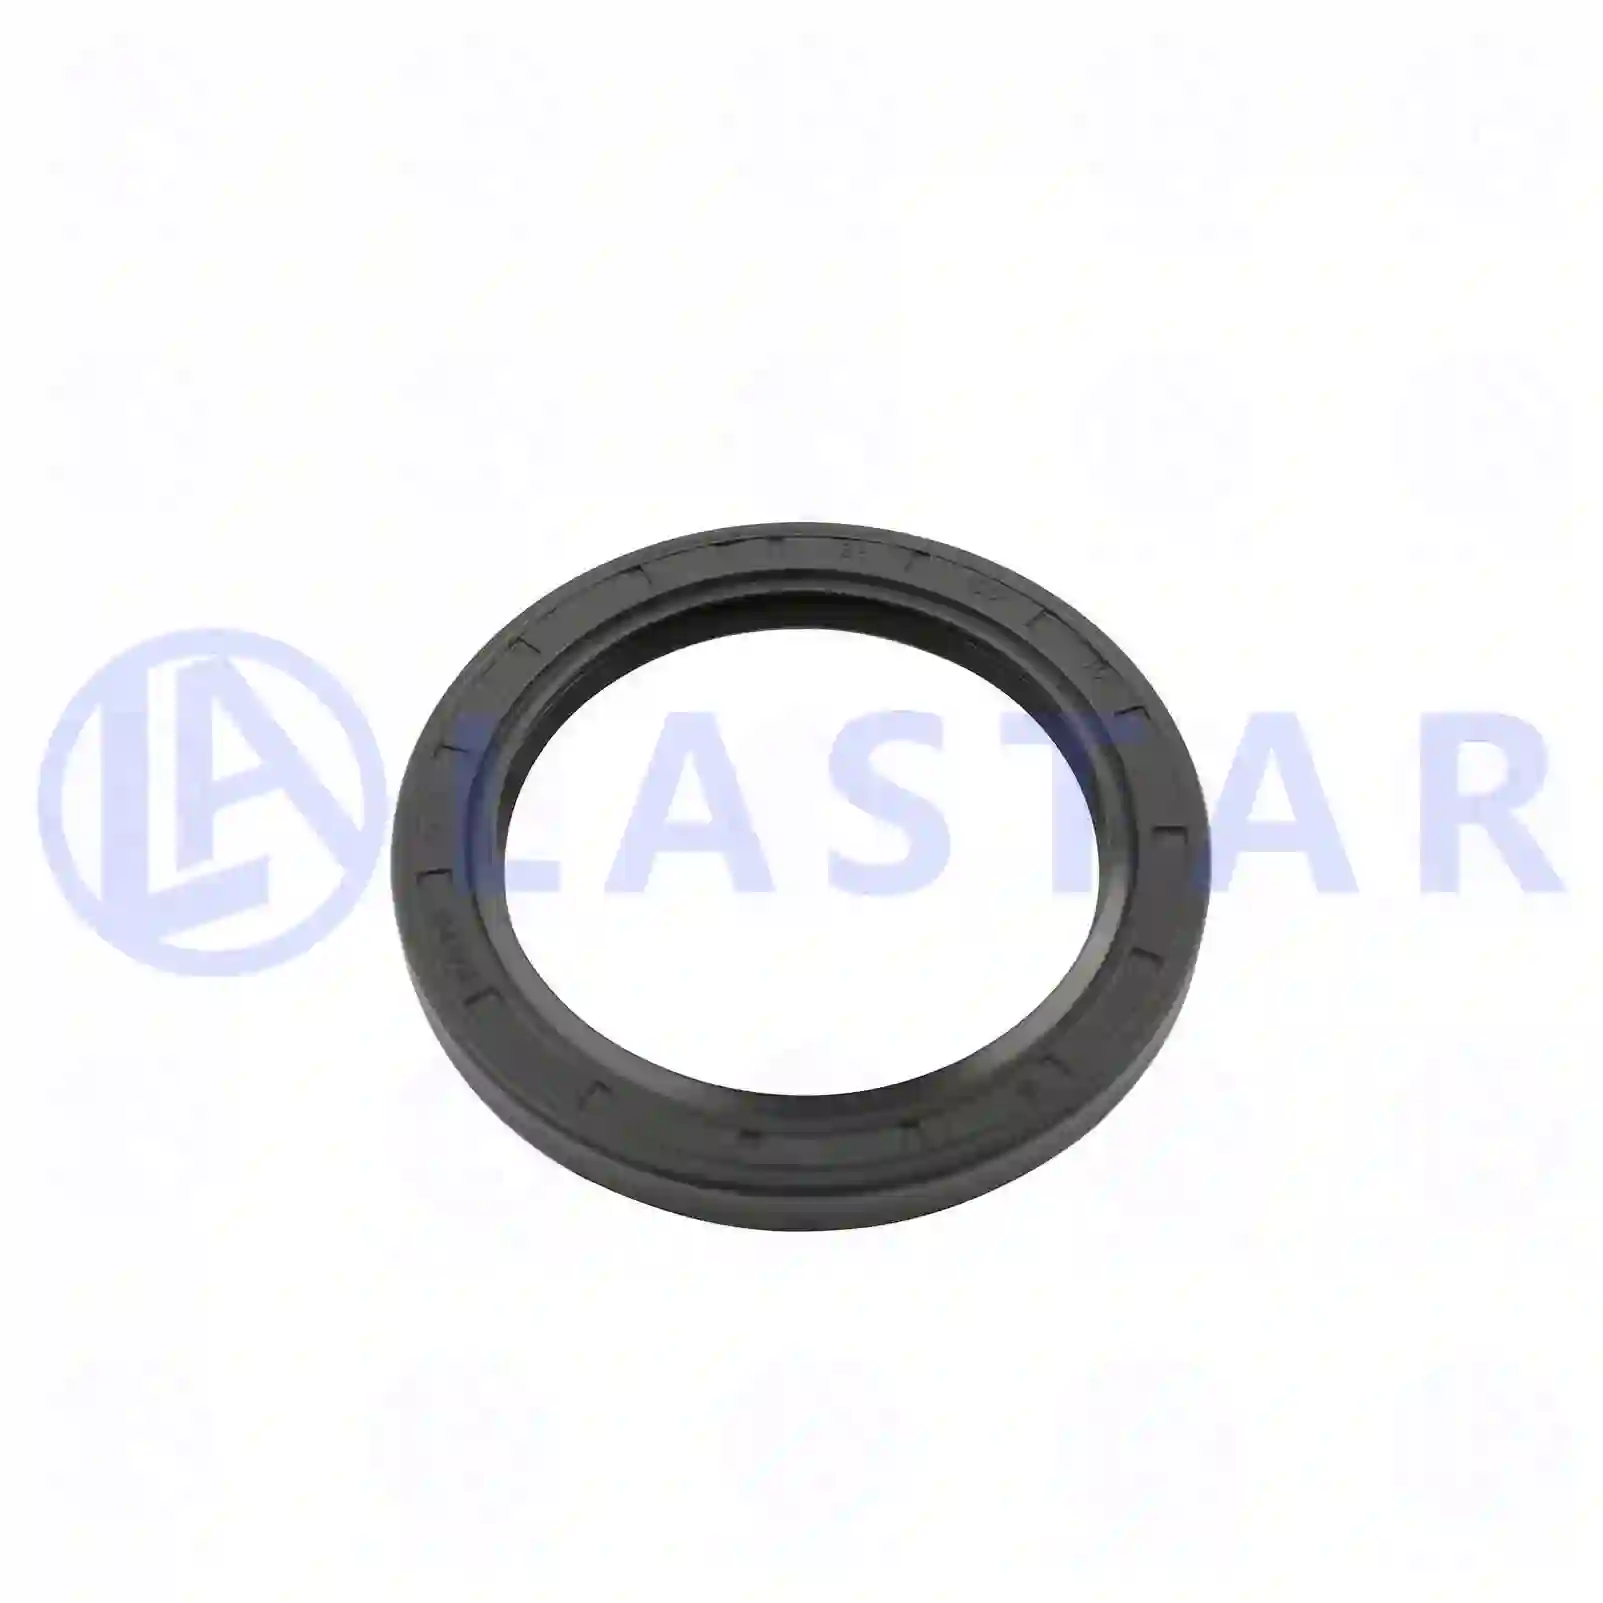 Oil seal, 77733584, 1324874, 1489047, 1533422 ||  77733584 Lastar Spare Part | Truck Spare Parts, Auotomotive Spare Parts Oil seal, 77733584, 1324874, 1489047, 1533422 ||  77733584 Lastar Spare Part | Truck Spare Parts, Auotomotive Spare Parts